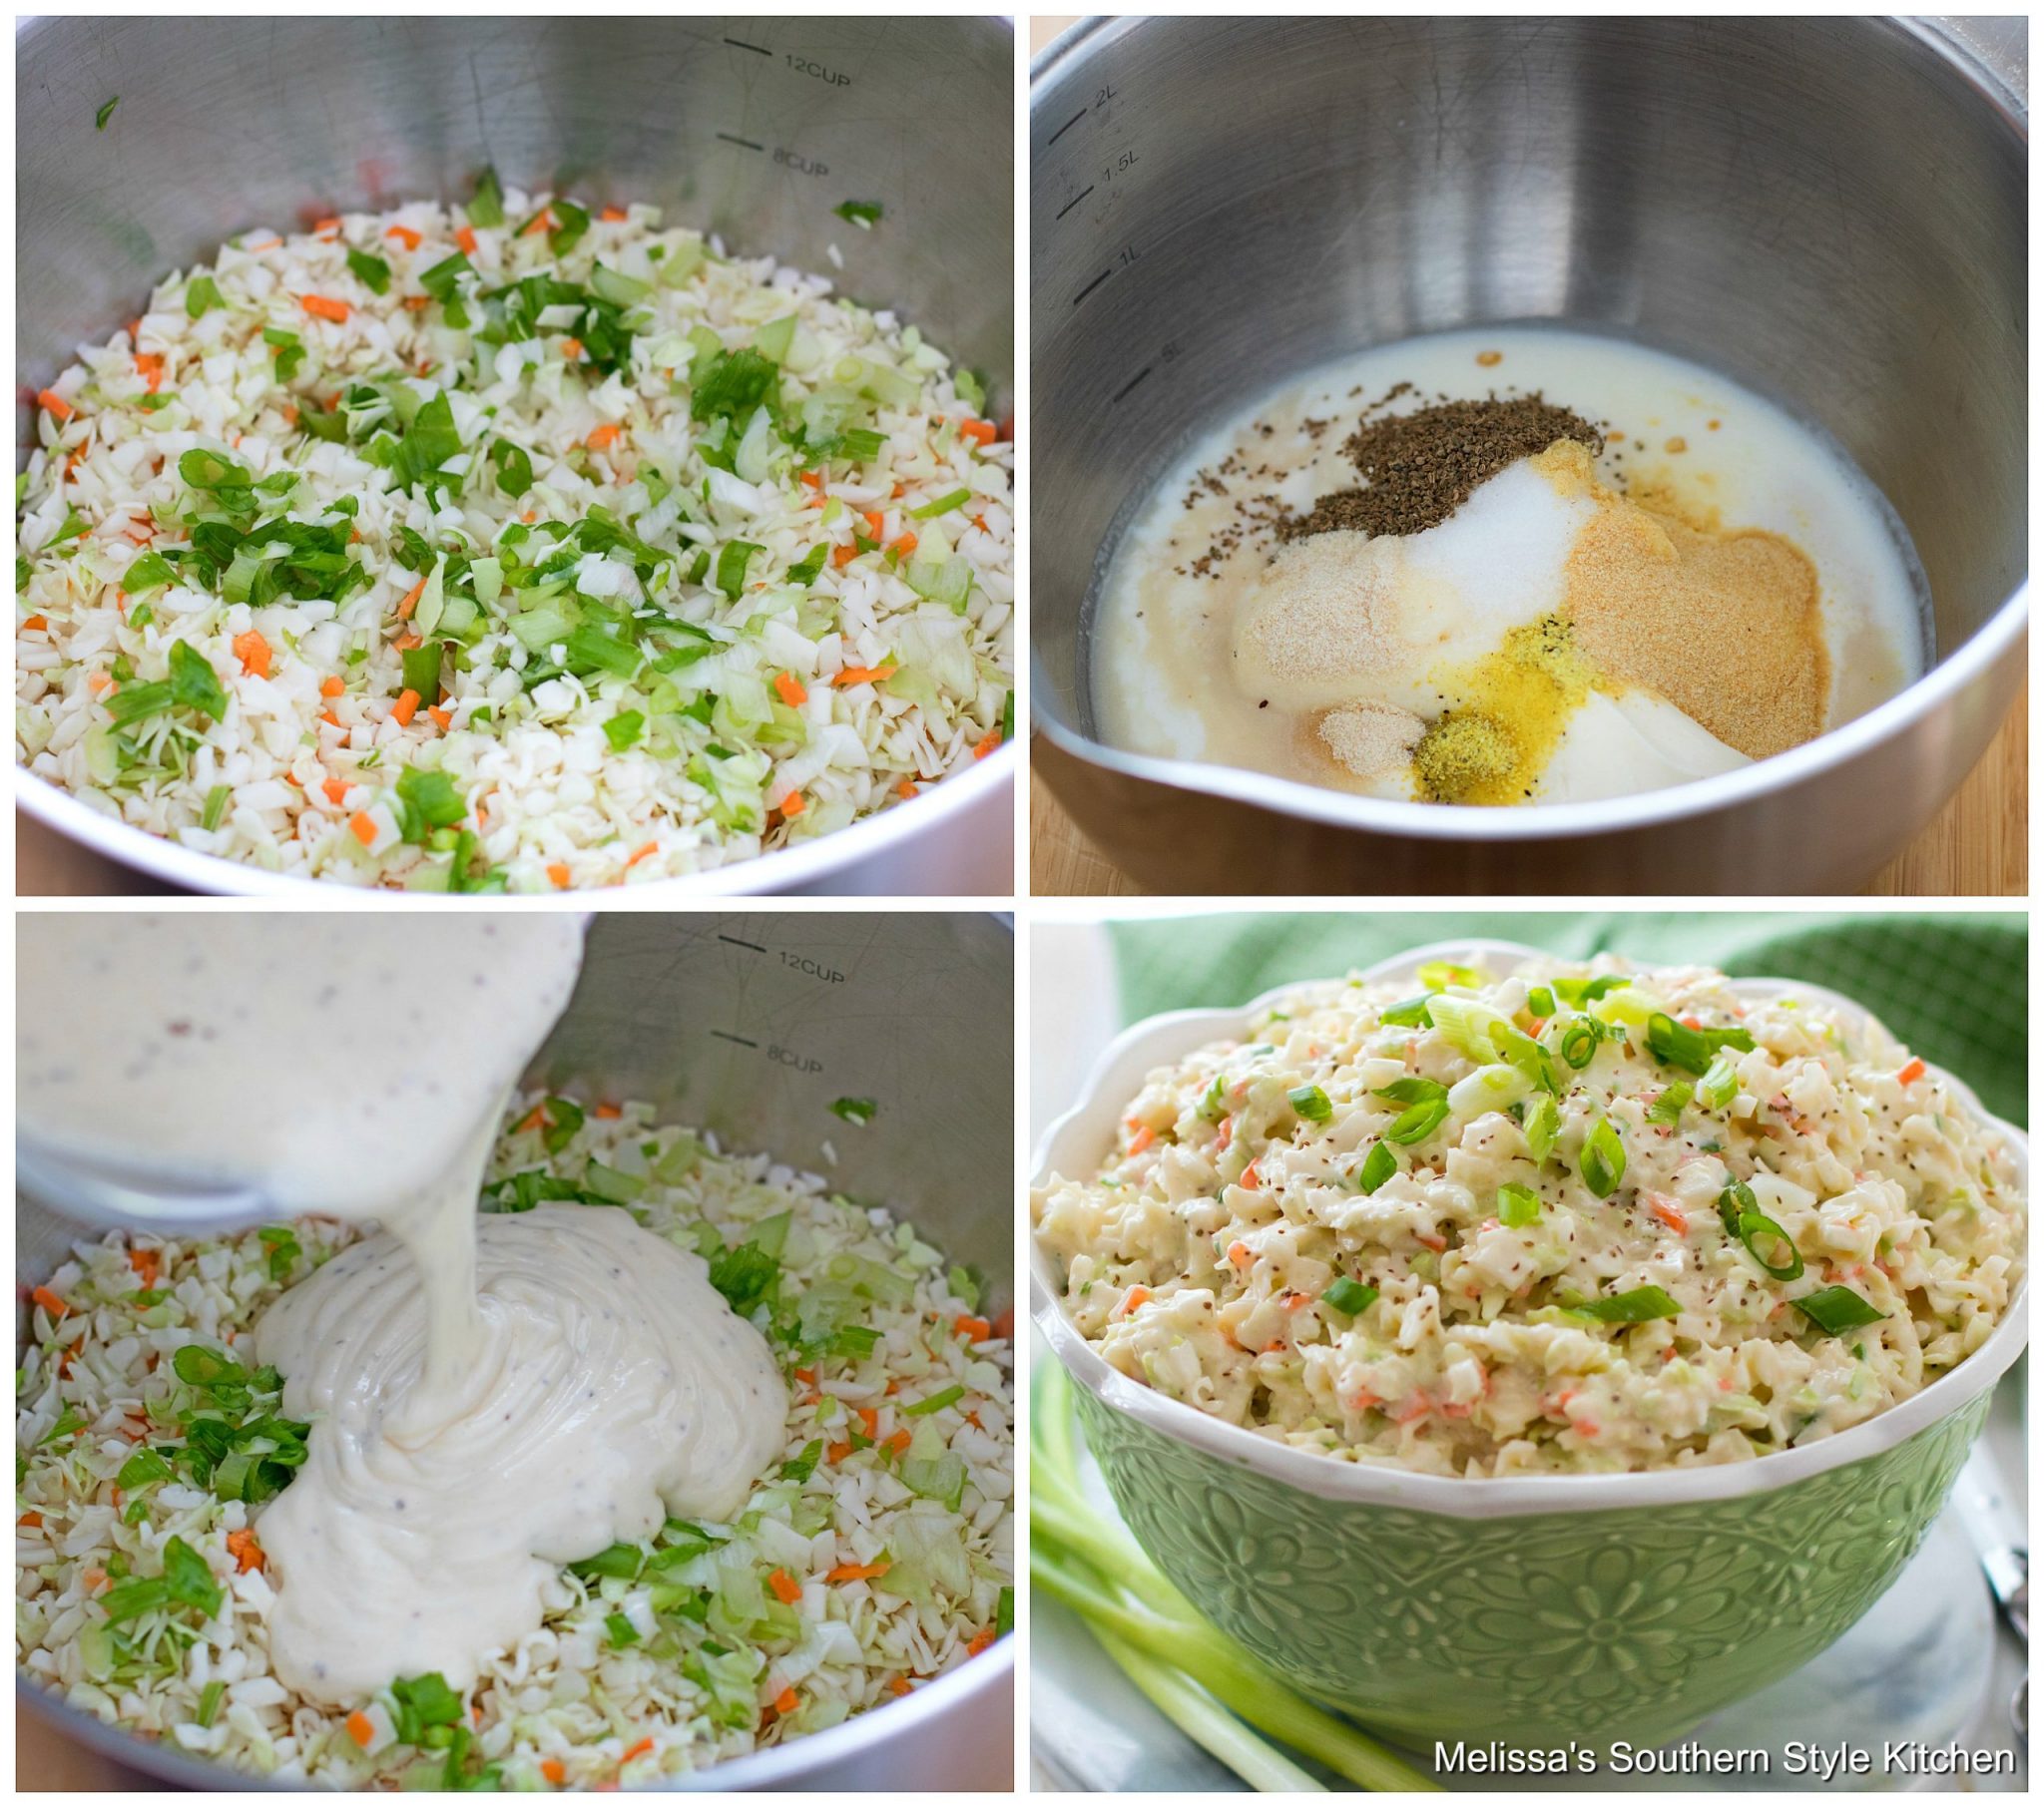 Step-by-step preparation images and ingredients for cole slaw